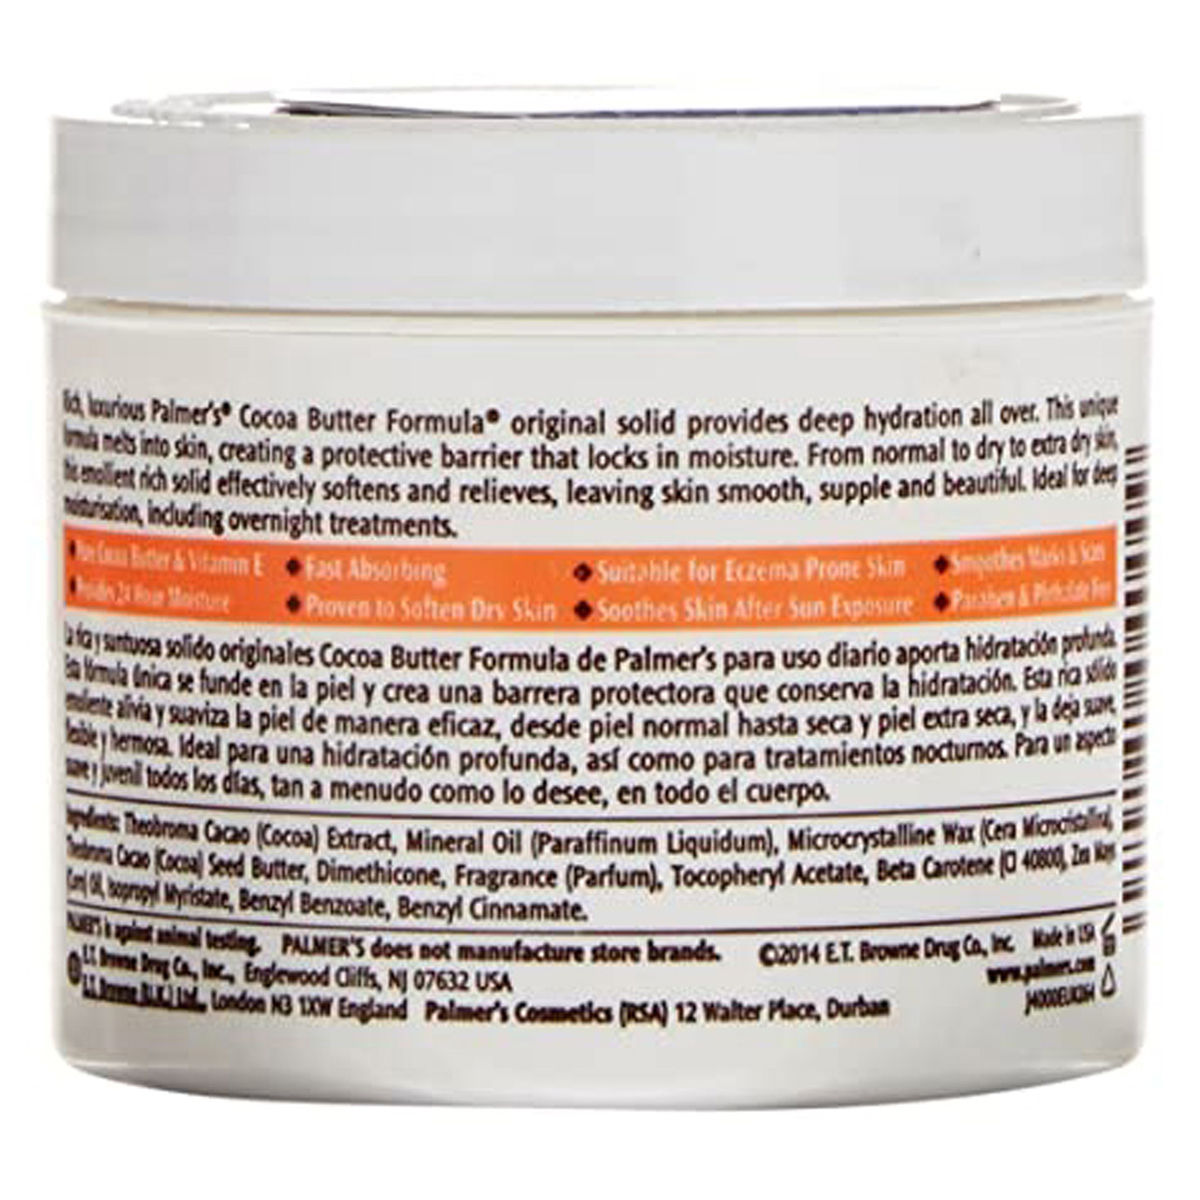 Palmers Cocoa Butter Marks & Scars Cream, 100 gm, Pack of 1 